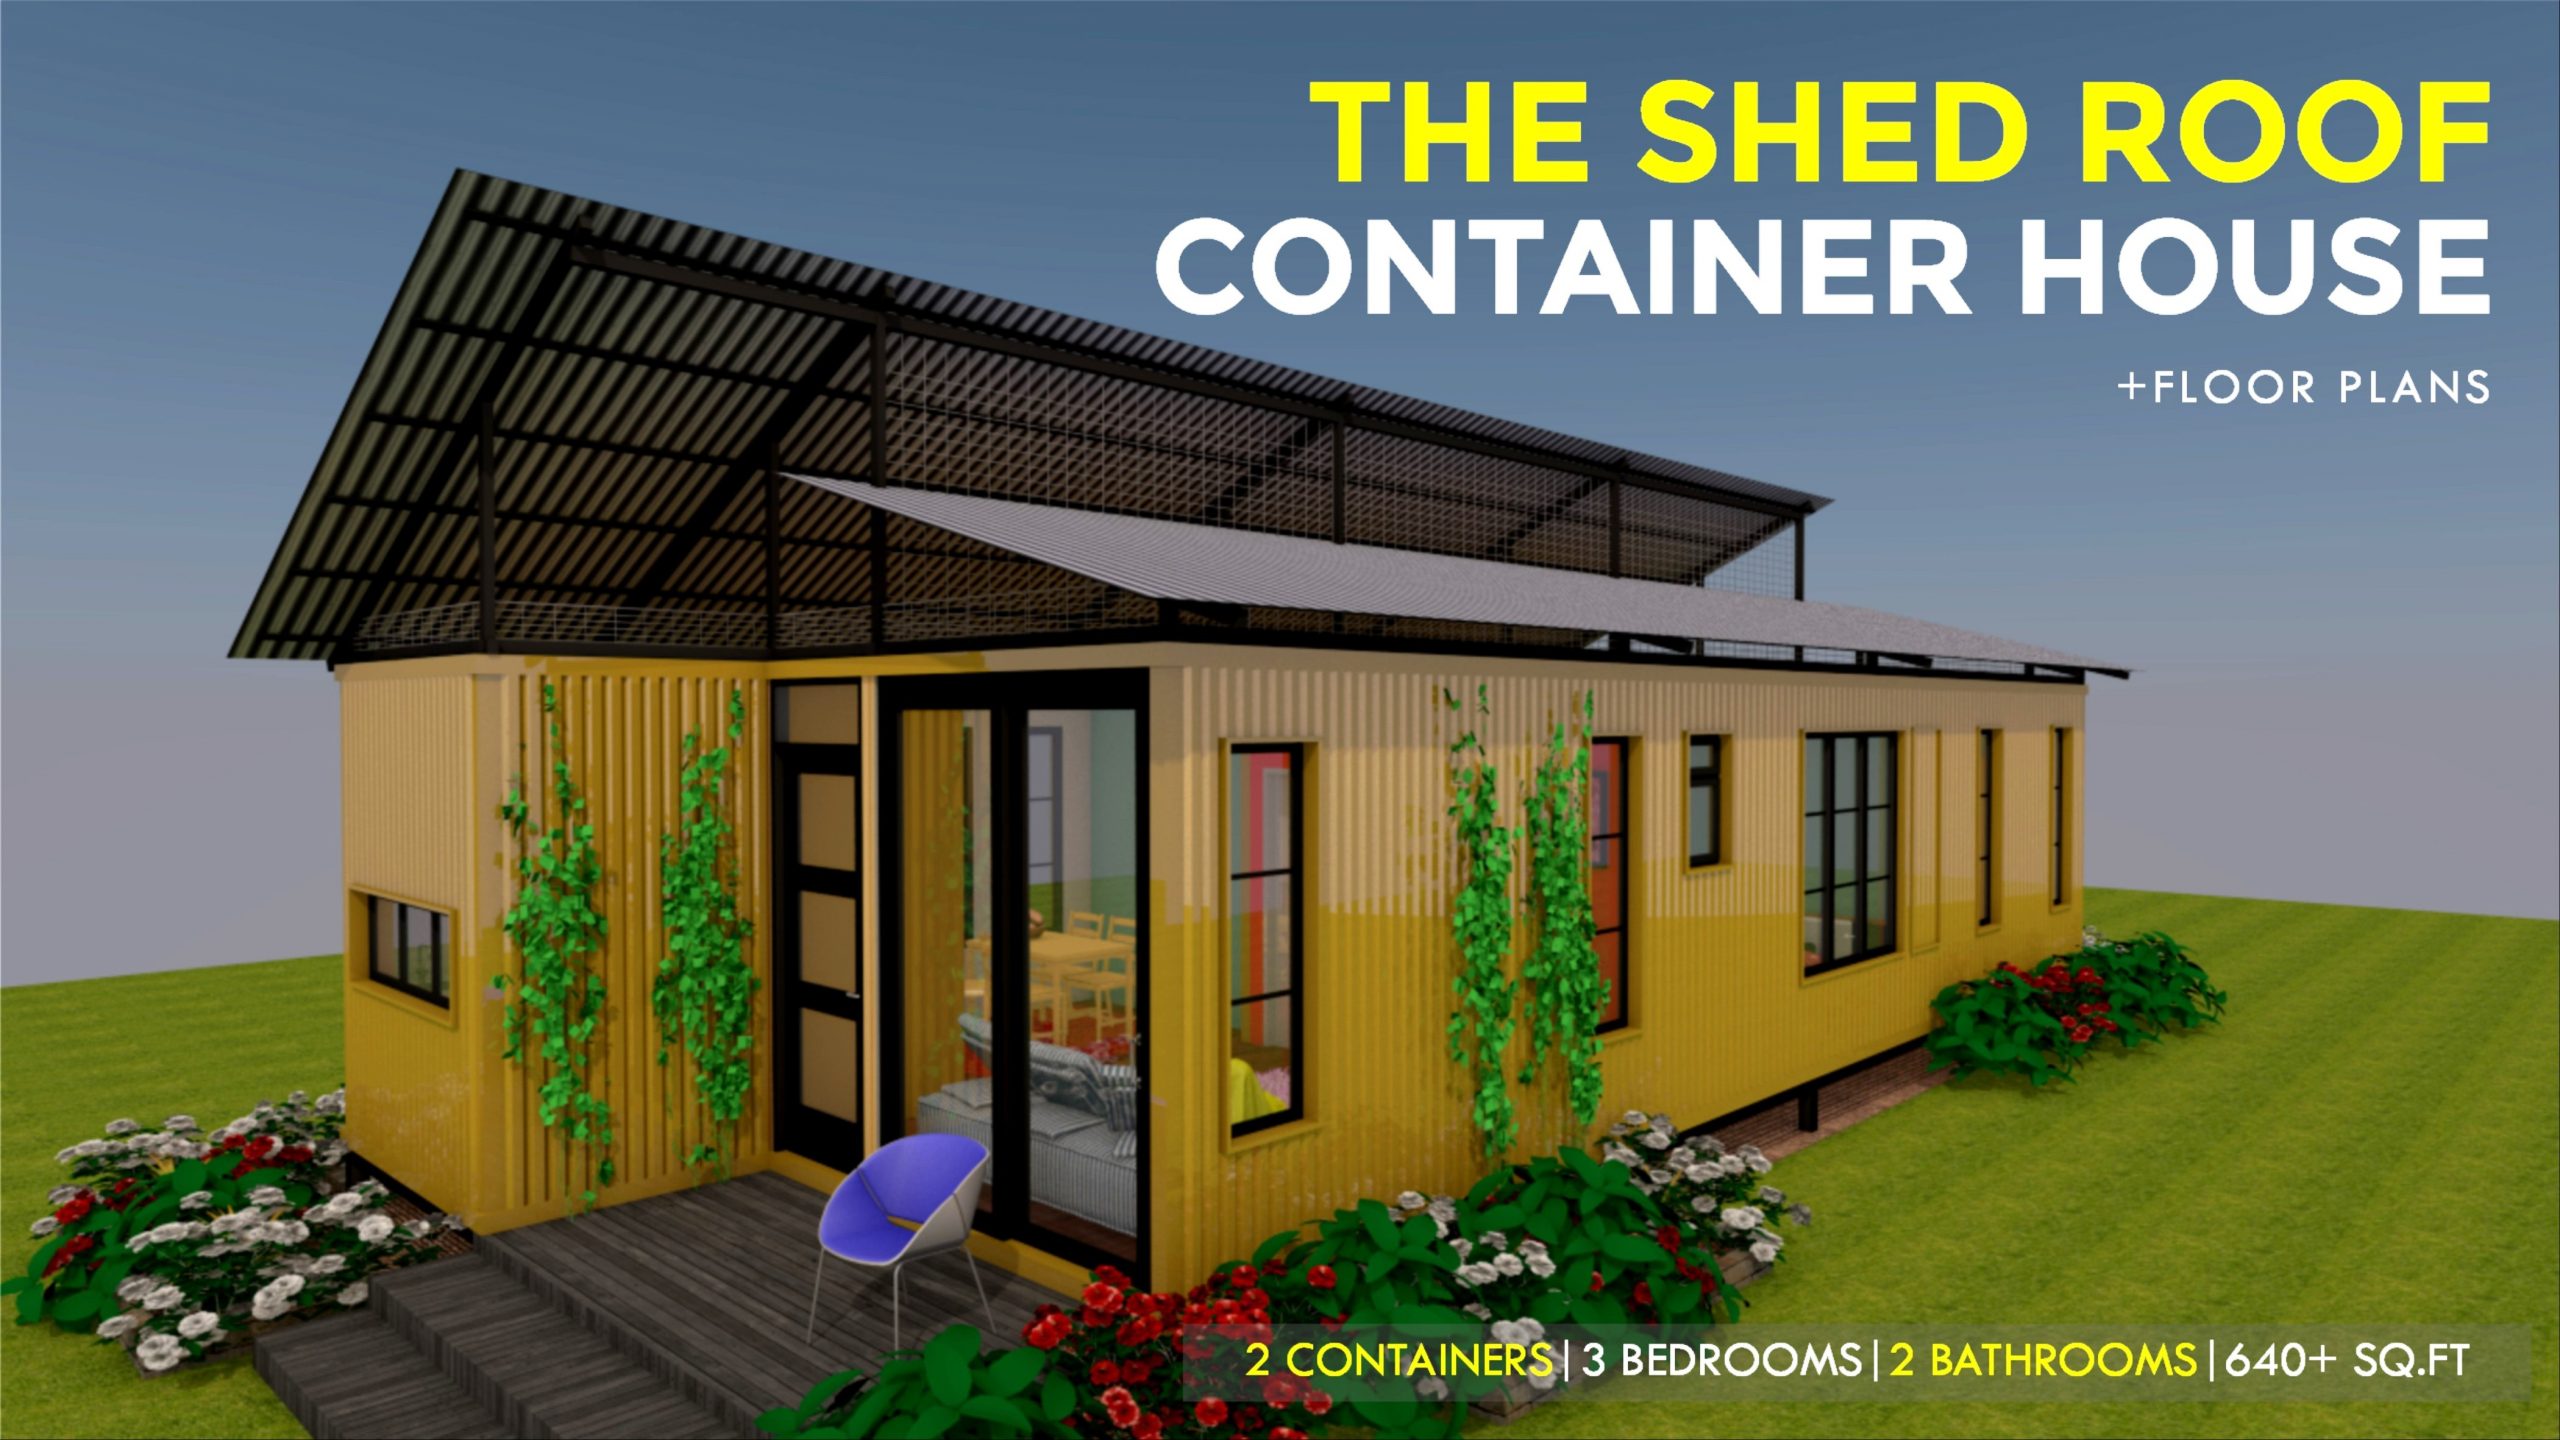 The Shed Roof Shipping Container 3 Bedroom House Design + Floor Plans | SHEDBOX 640